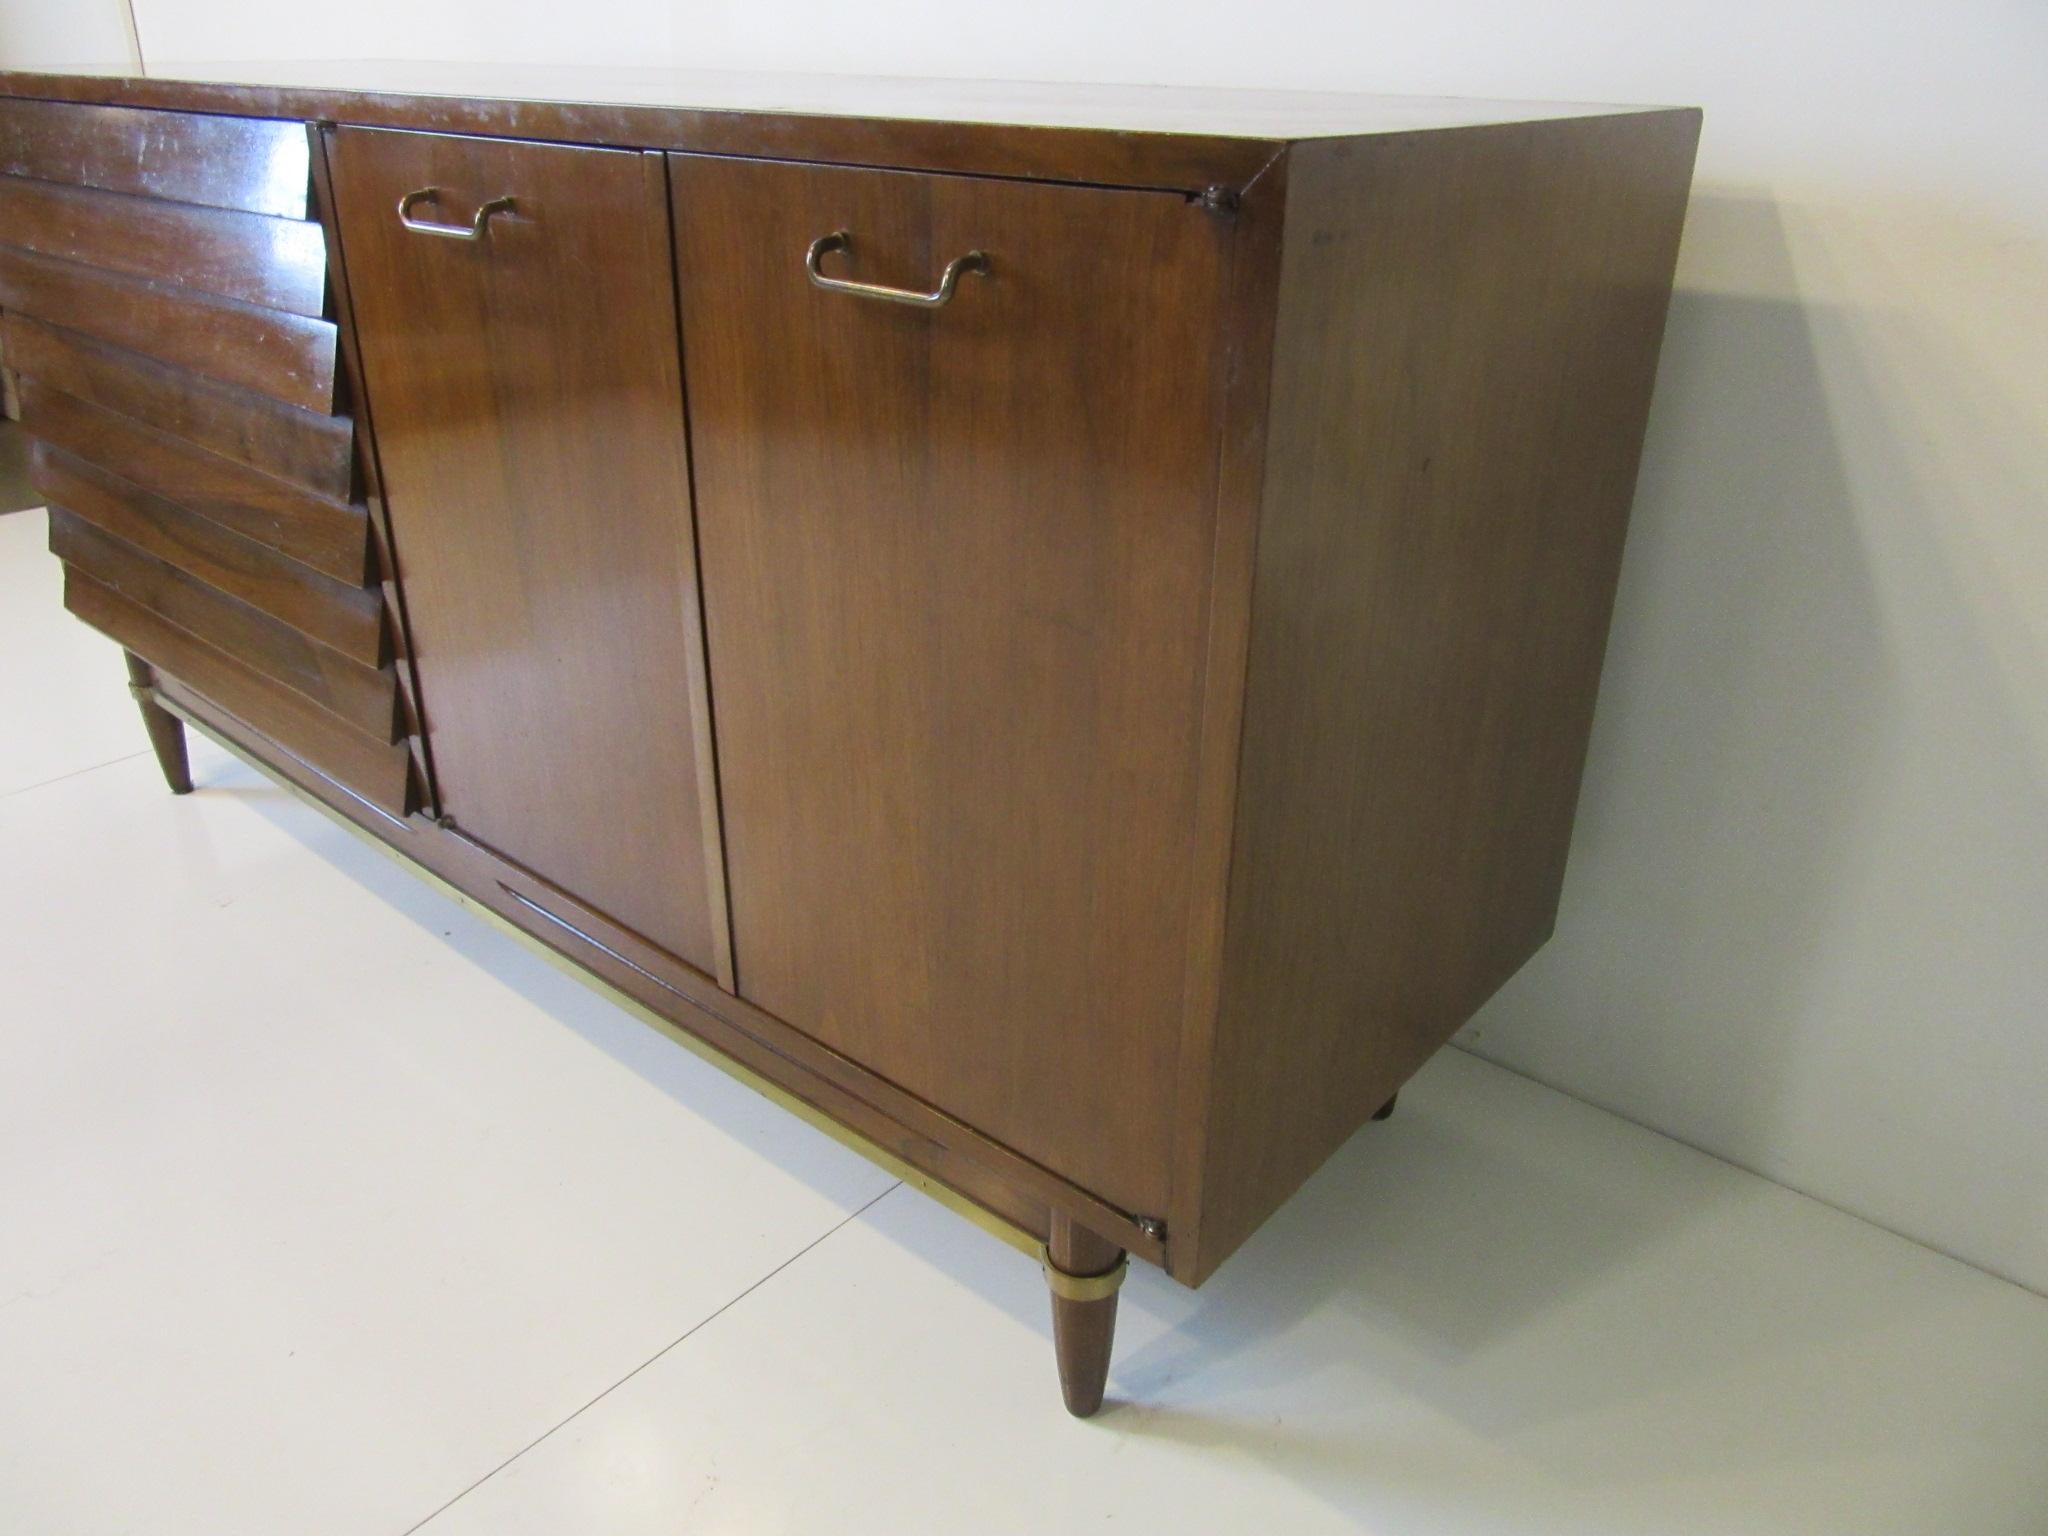 A dark walnut credenza / sideboard with double doors and three shelves, two cubby storage areas, and the other side having three large drawers with louvered fronts. Brass handles and lower matching stretchers with conical legs complete the